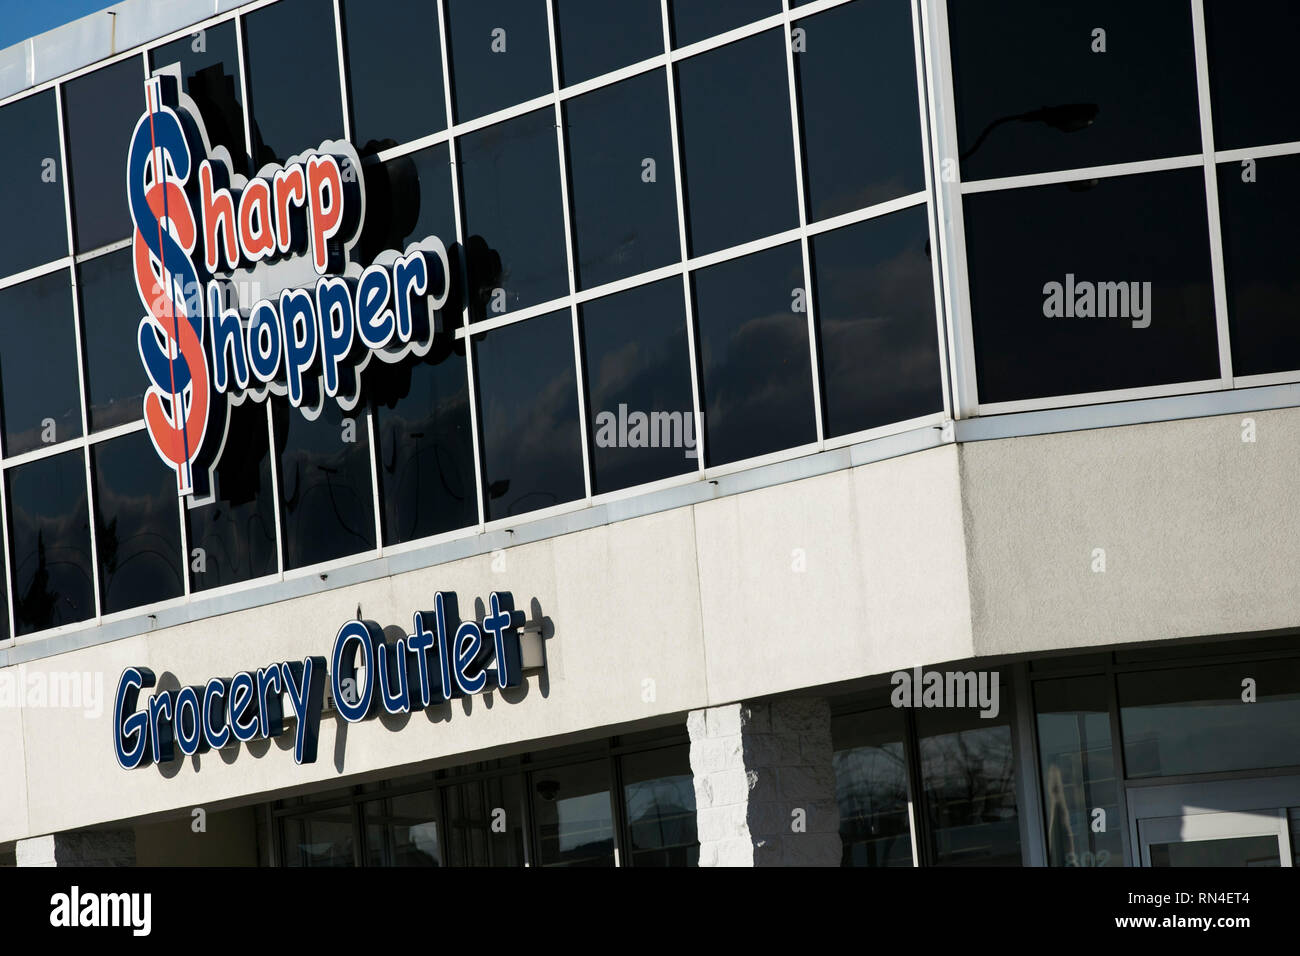 A logo sign outside of a Sharp Shopper Grocery Outlet store location in Winchester, Virginia on February 13, 2019. Stock Photo